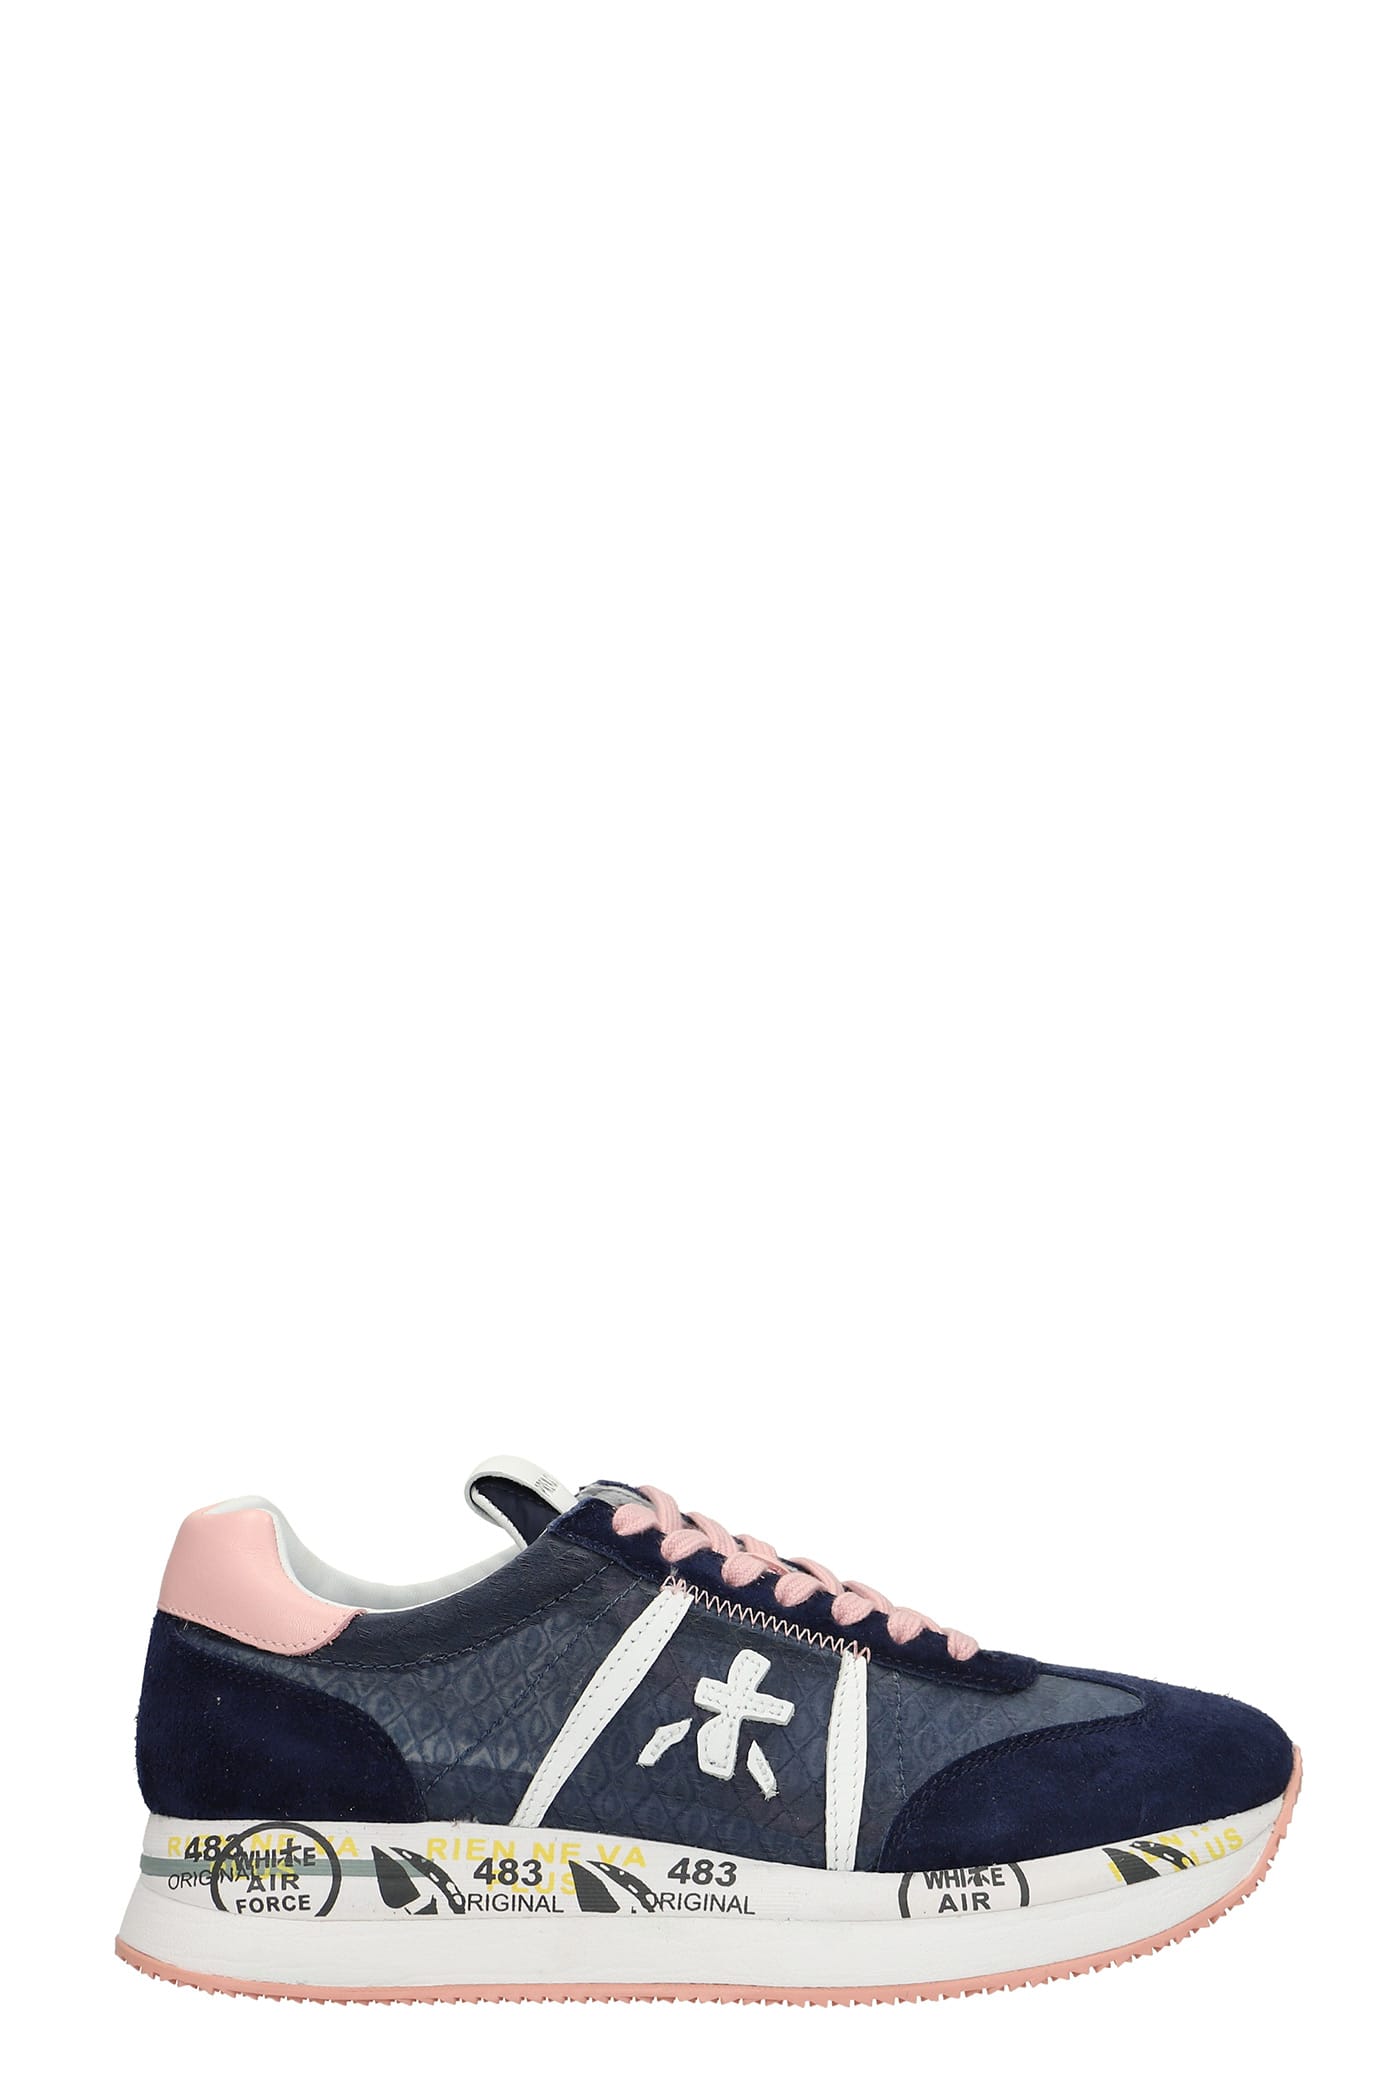 Premiata Conny Sneakers In Blue Suede And Fabric